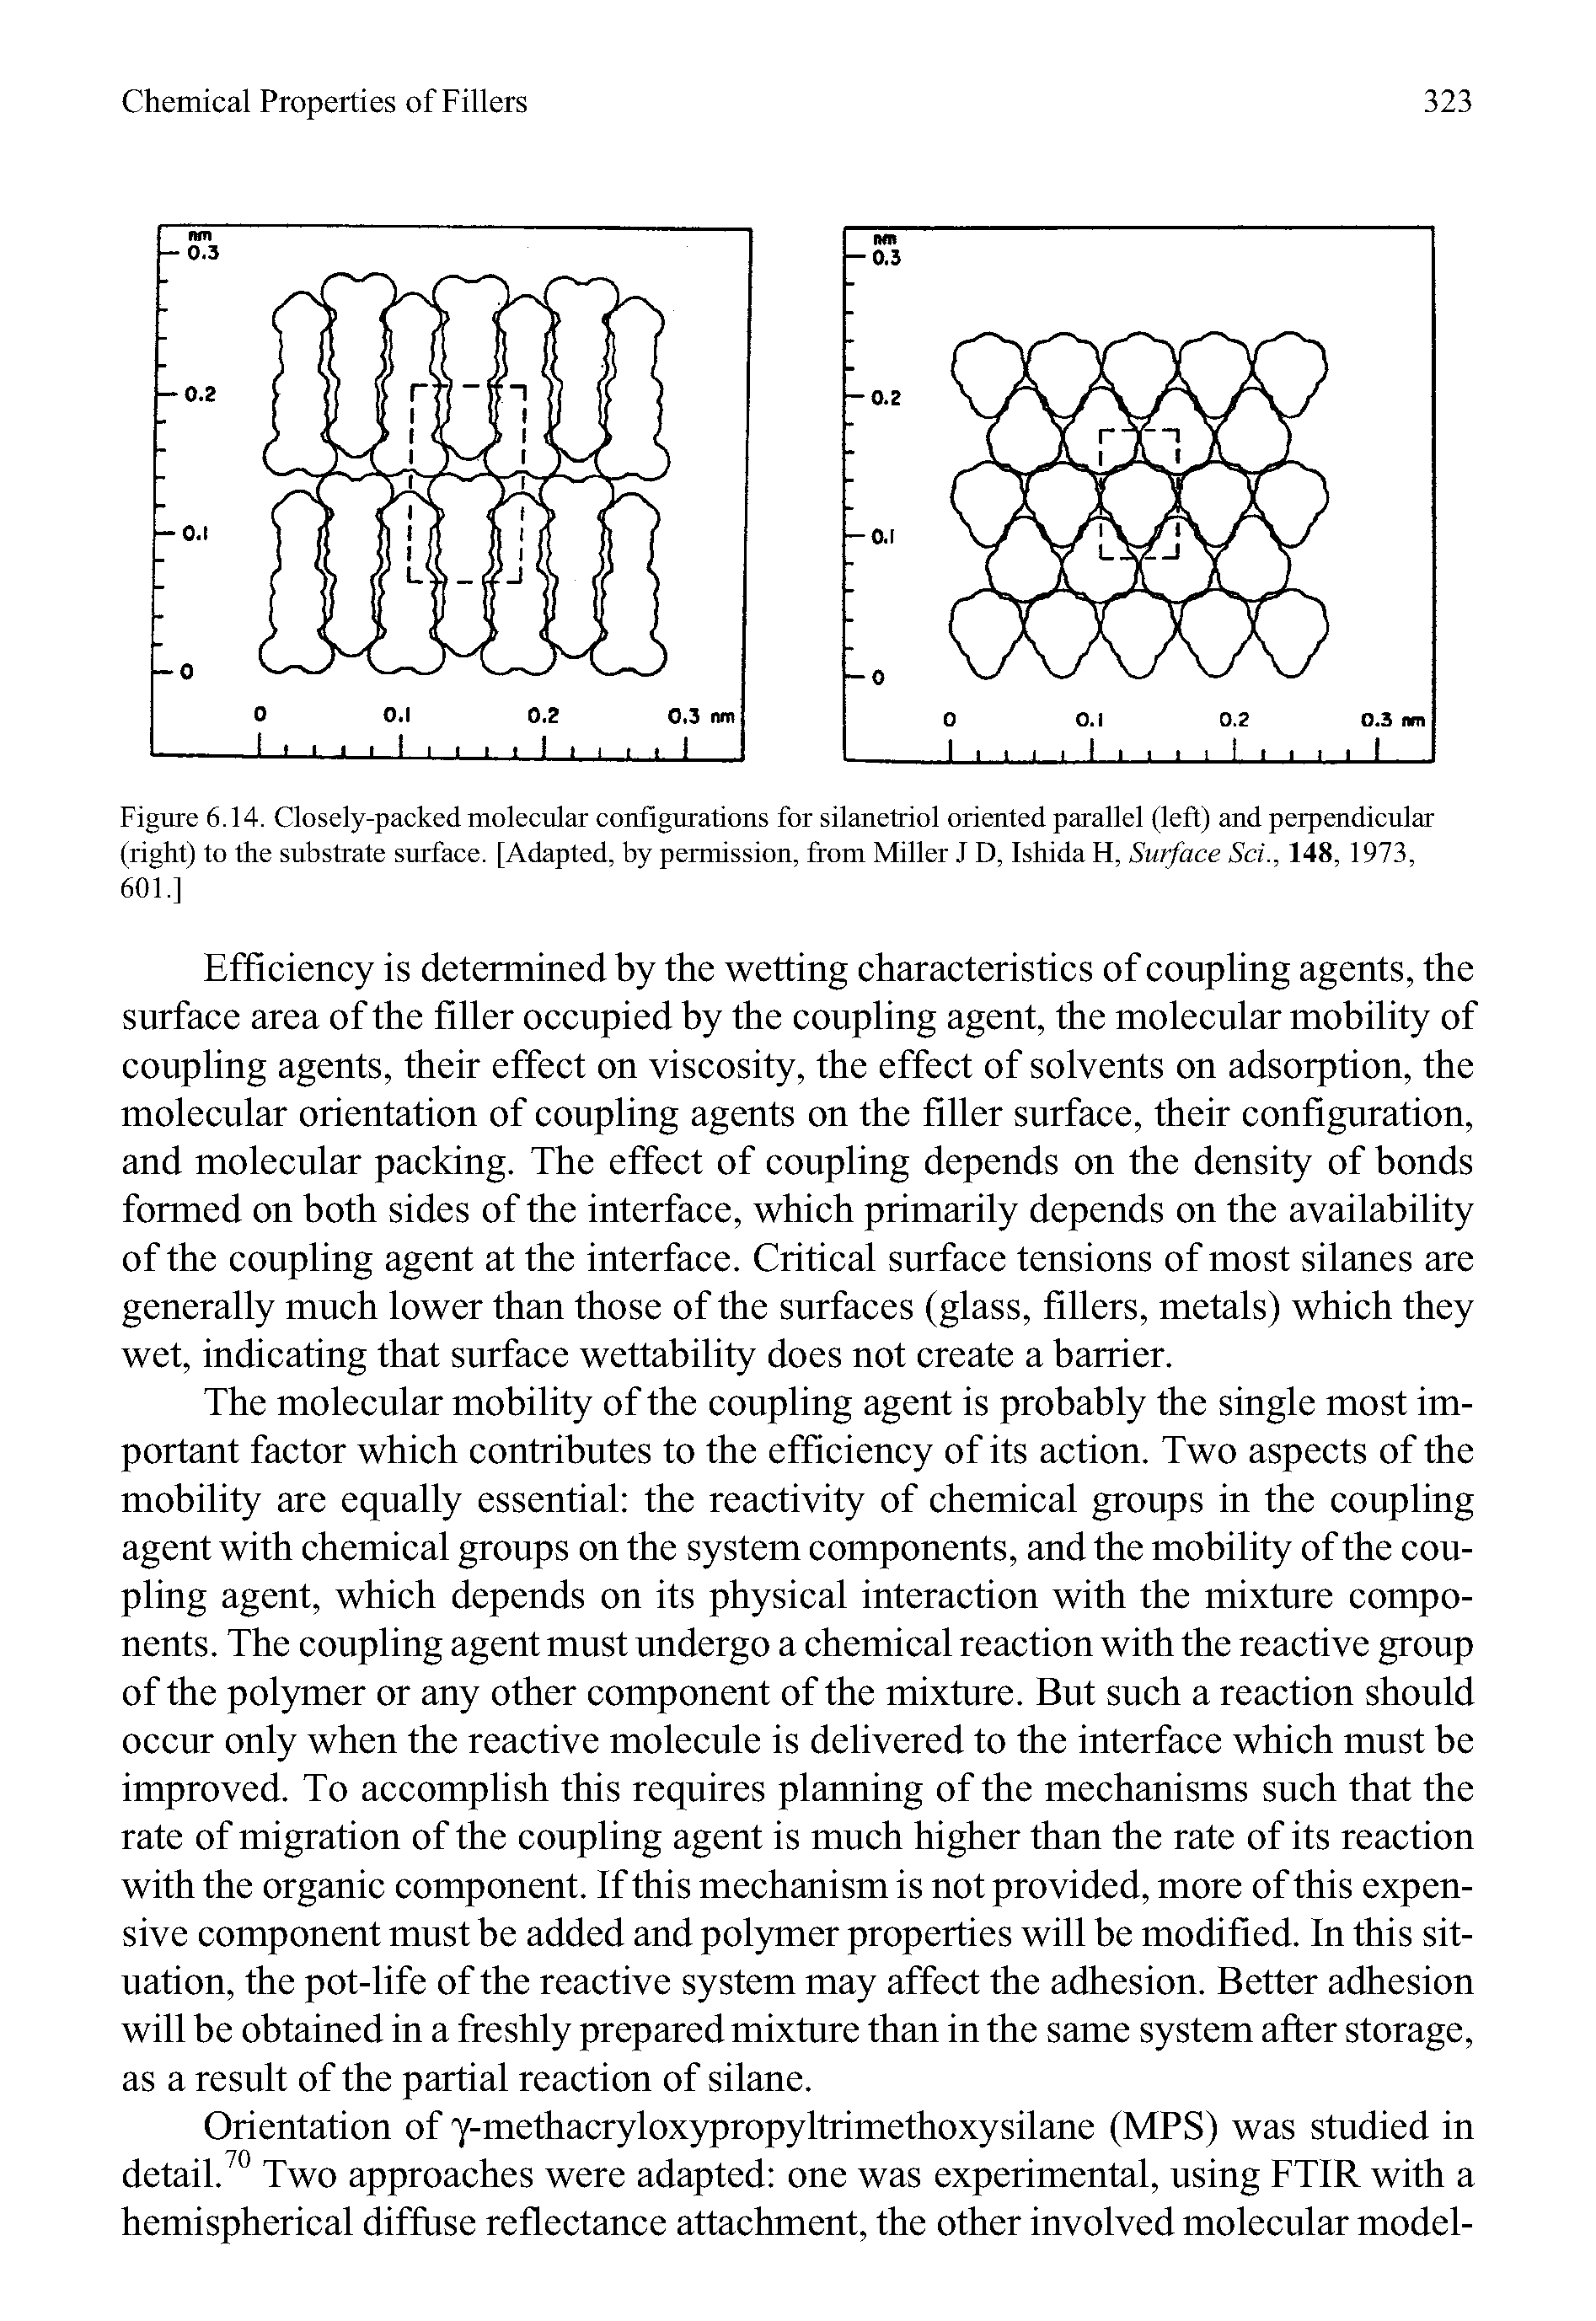 Figure 6.14. Closely-packed molecular configurations for silanetriol oriented parallel (left) and perpendicular (right) to the substrate surface. [Adapted, by permission, from Miller J D, Ishida H, Surface Sci., 148, 1973,...